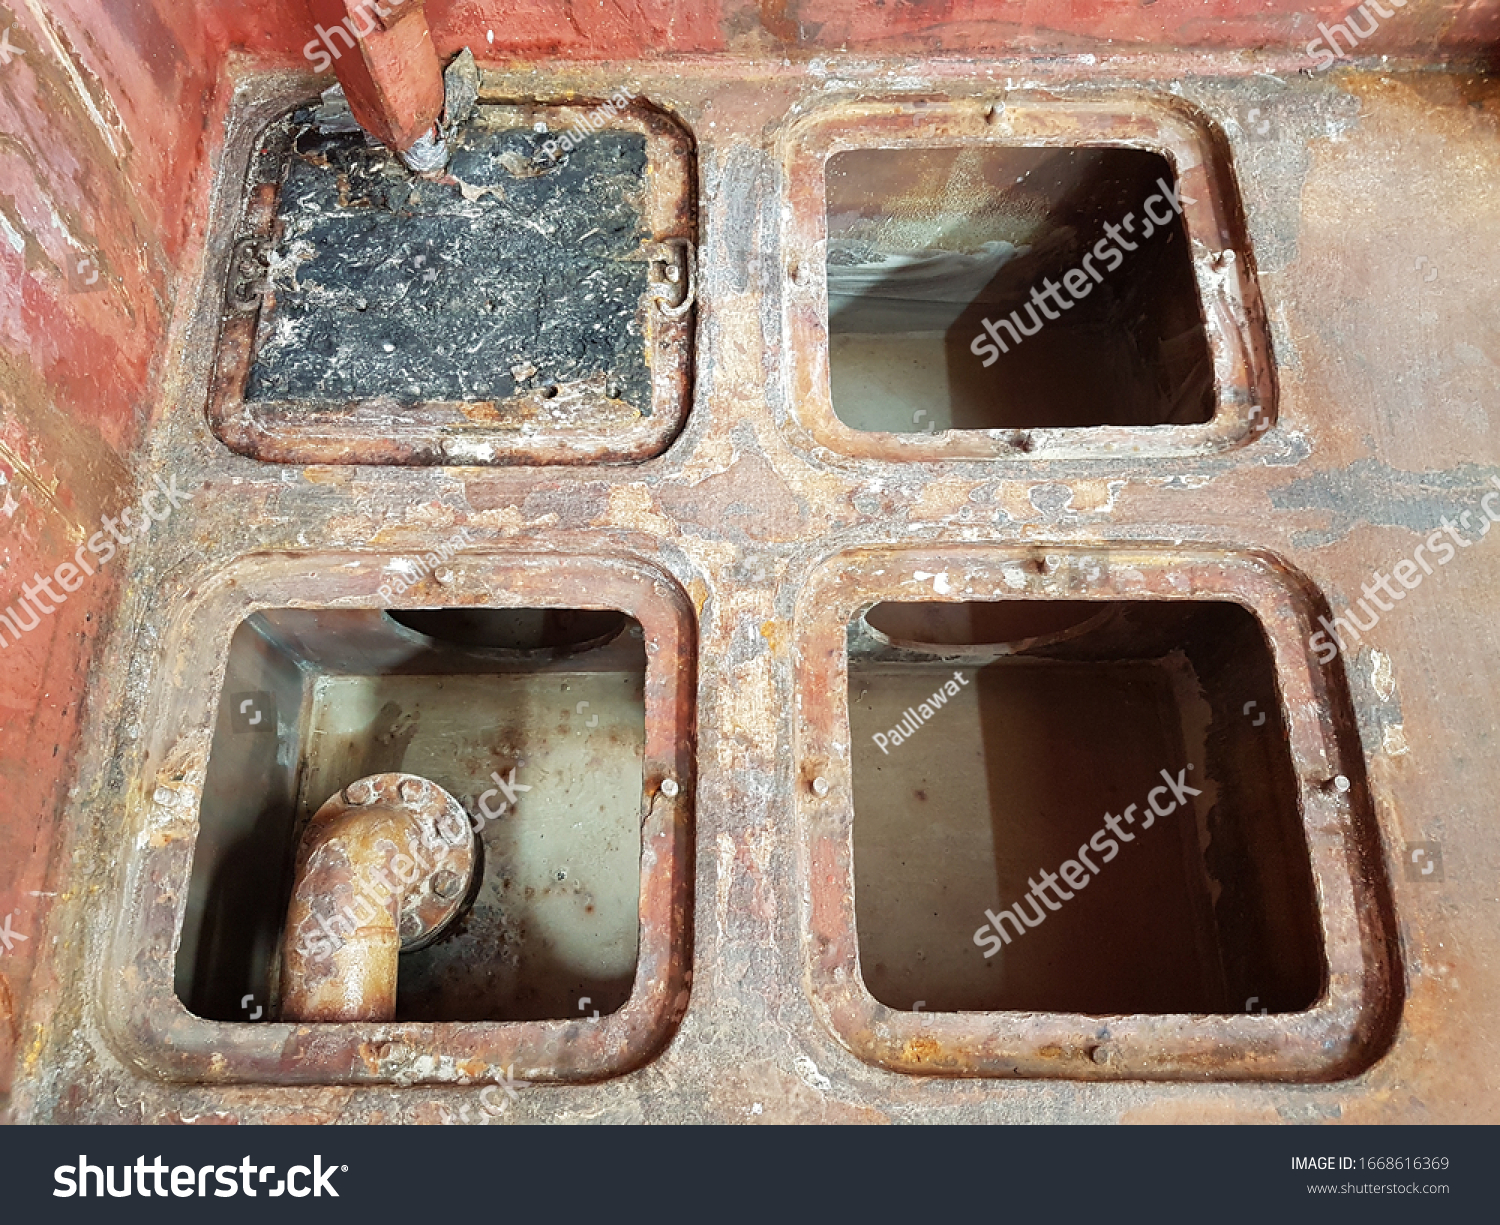 cargo hold bilge wells on bulk carrier after cleaning and preparing to list next cargo as per charter party. these wells will collect water from cargo and can be pumped out to prevent the damage. #1668616369